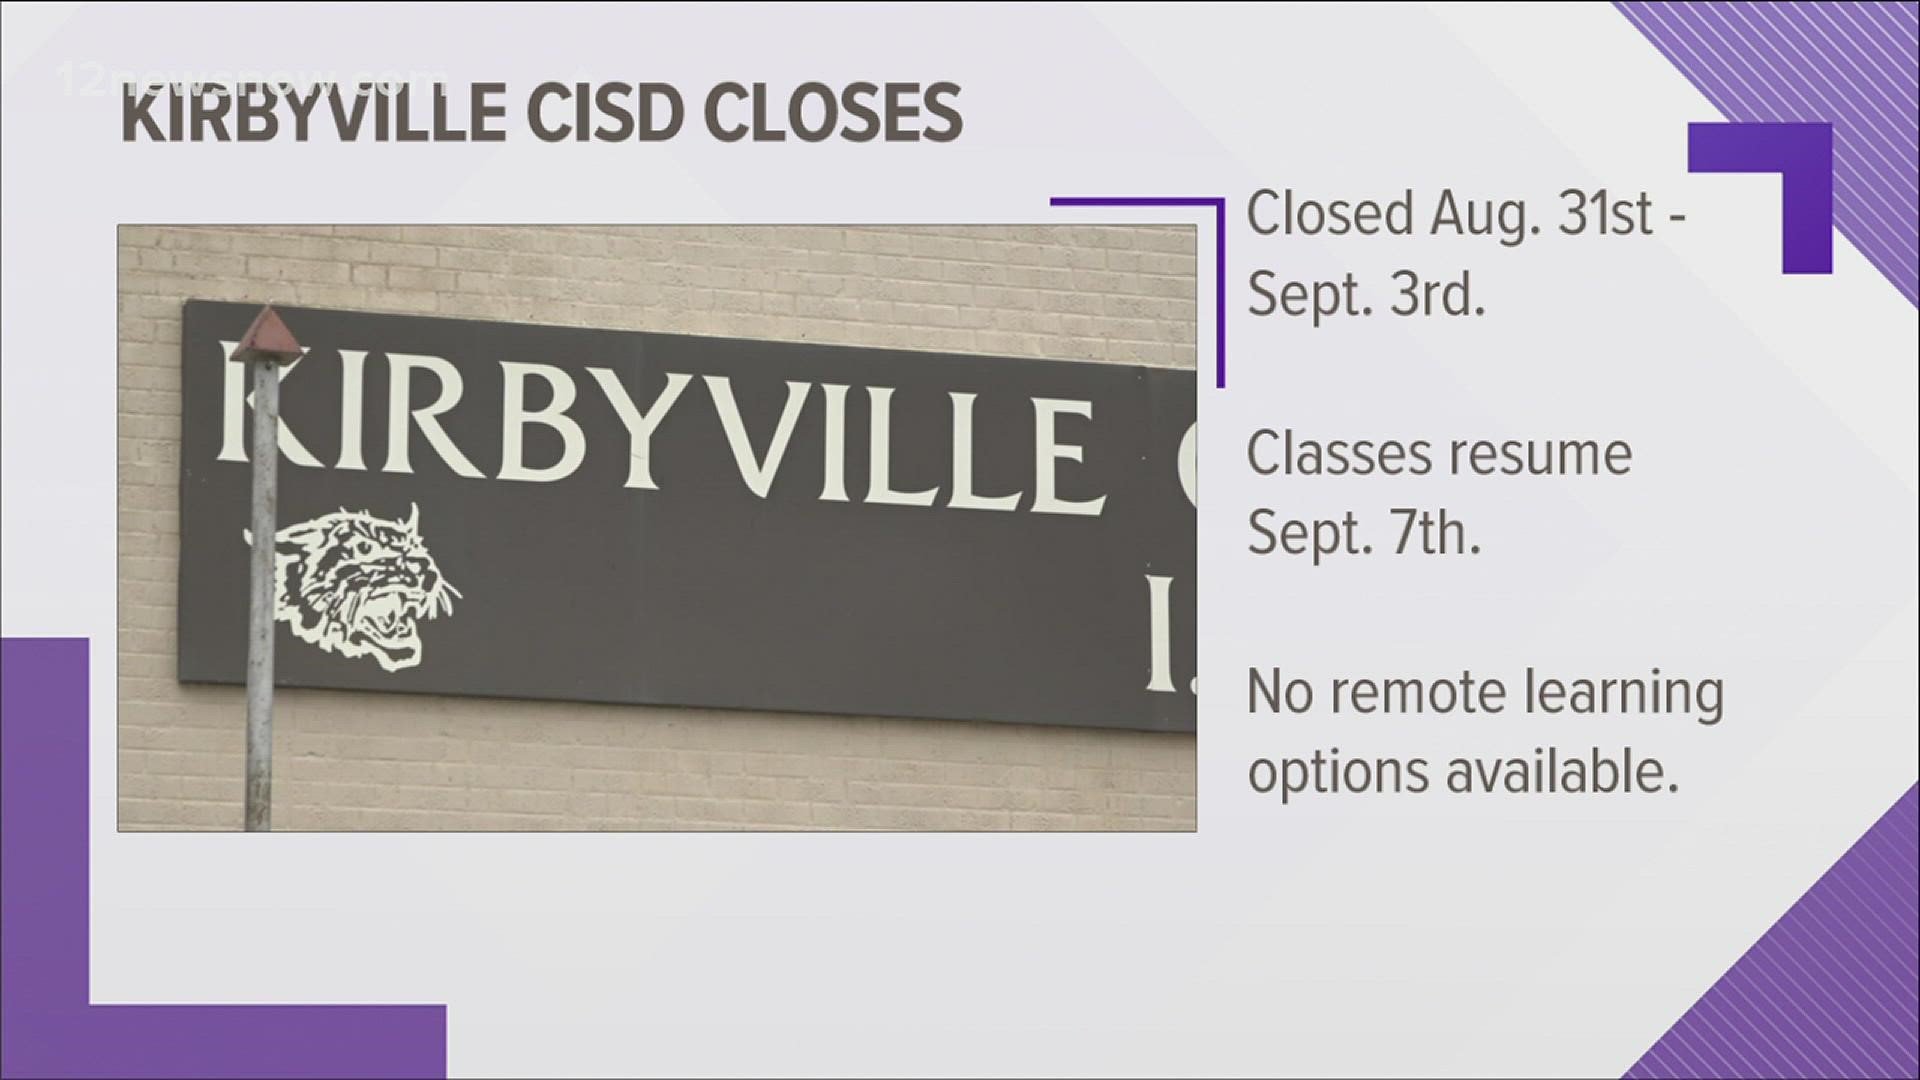 Newton and Kirbyville ISD announced on Monday that all classes and extra-curricular activities would resume Tuesday, Sept. 7, 2021.